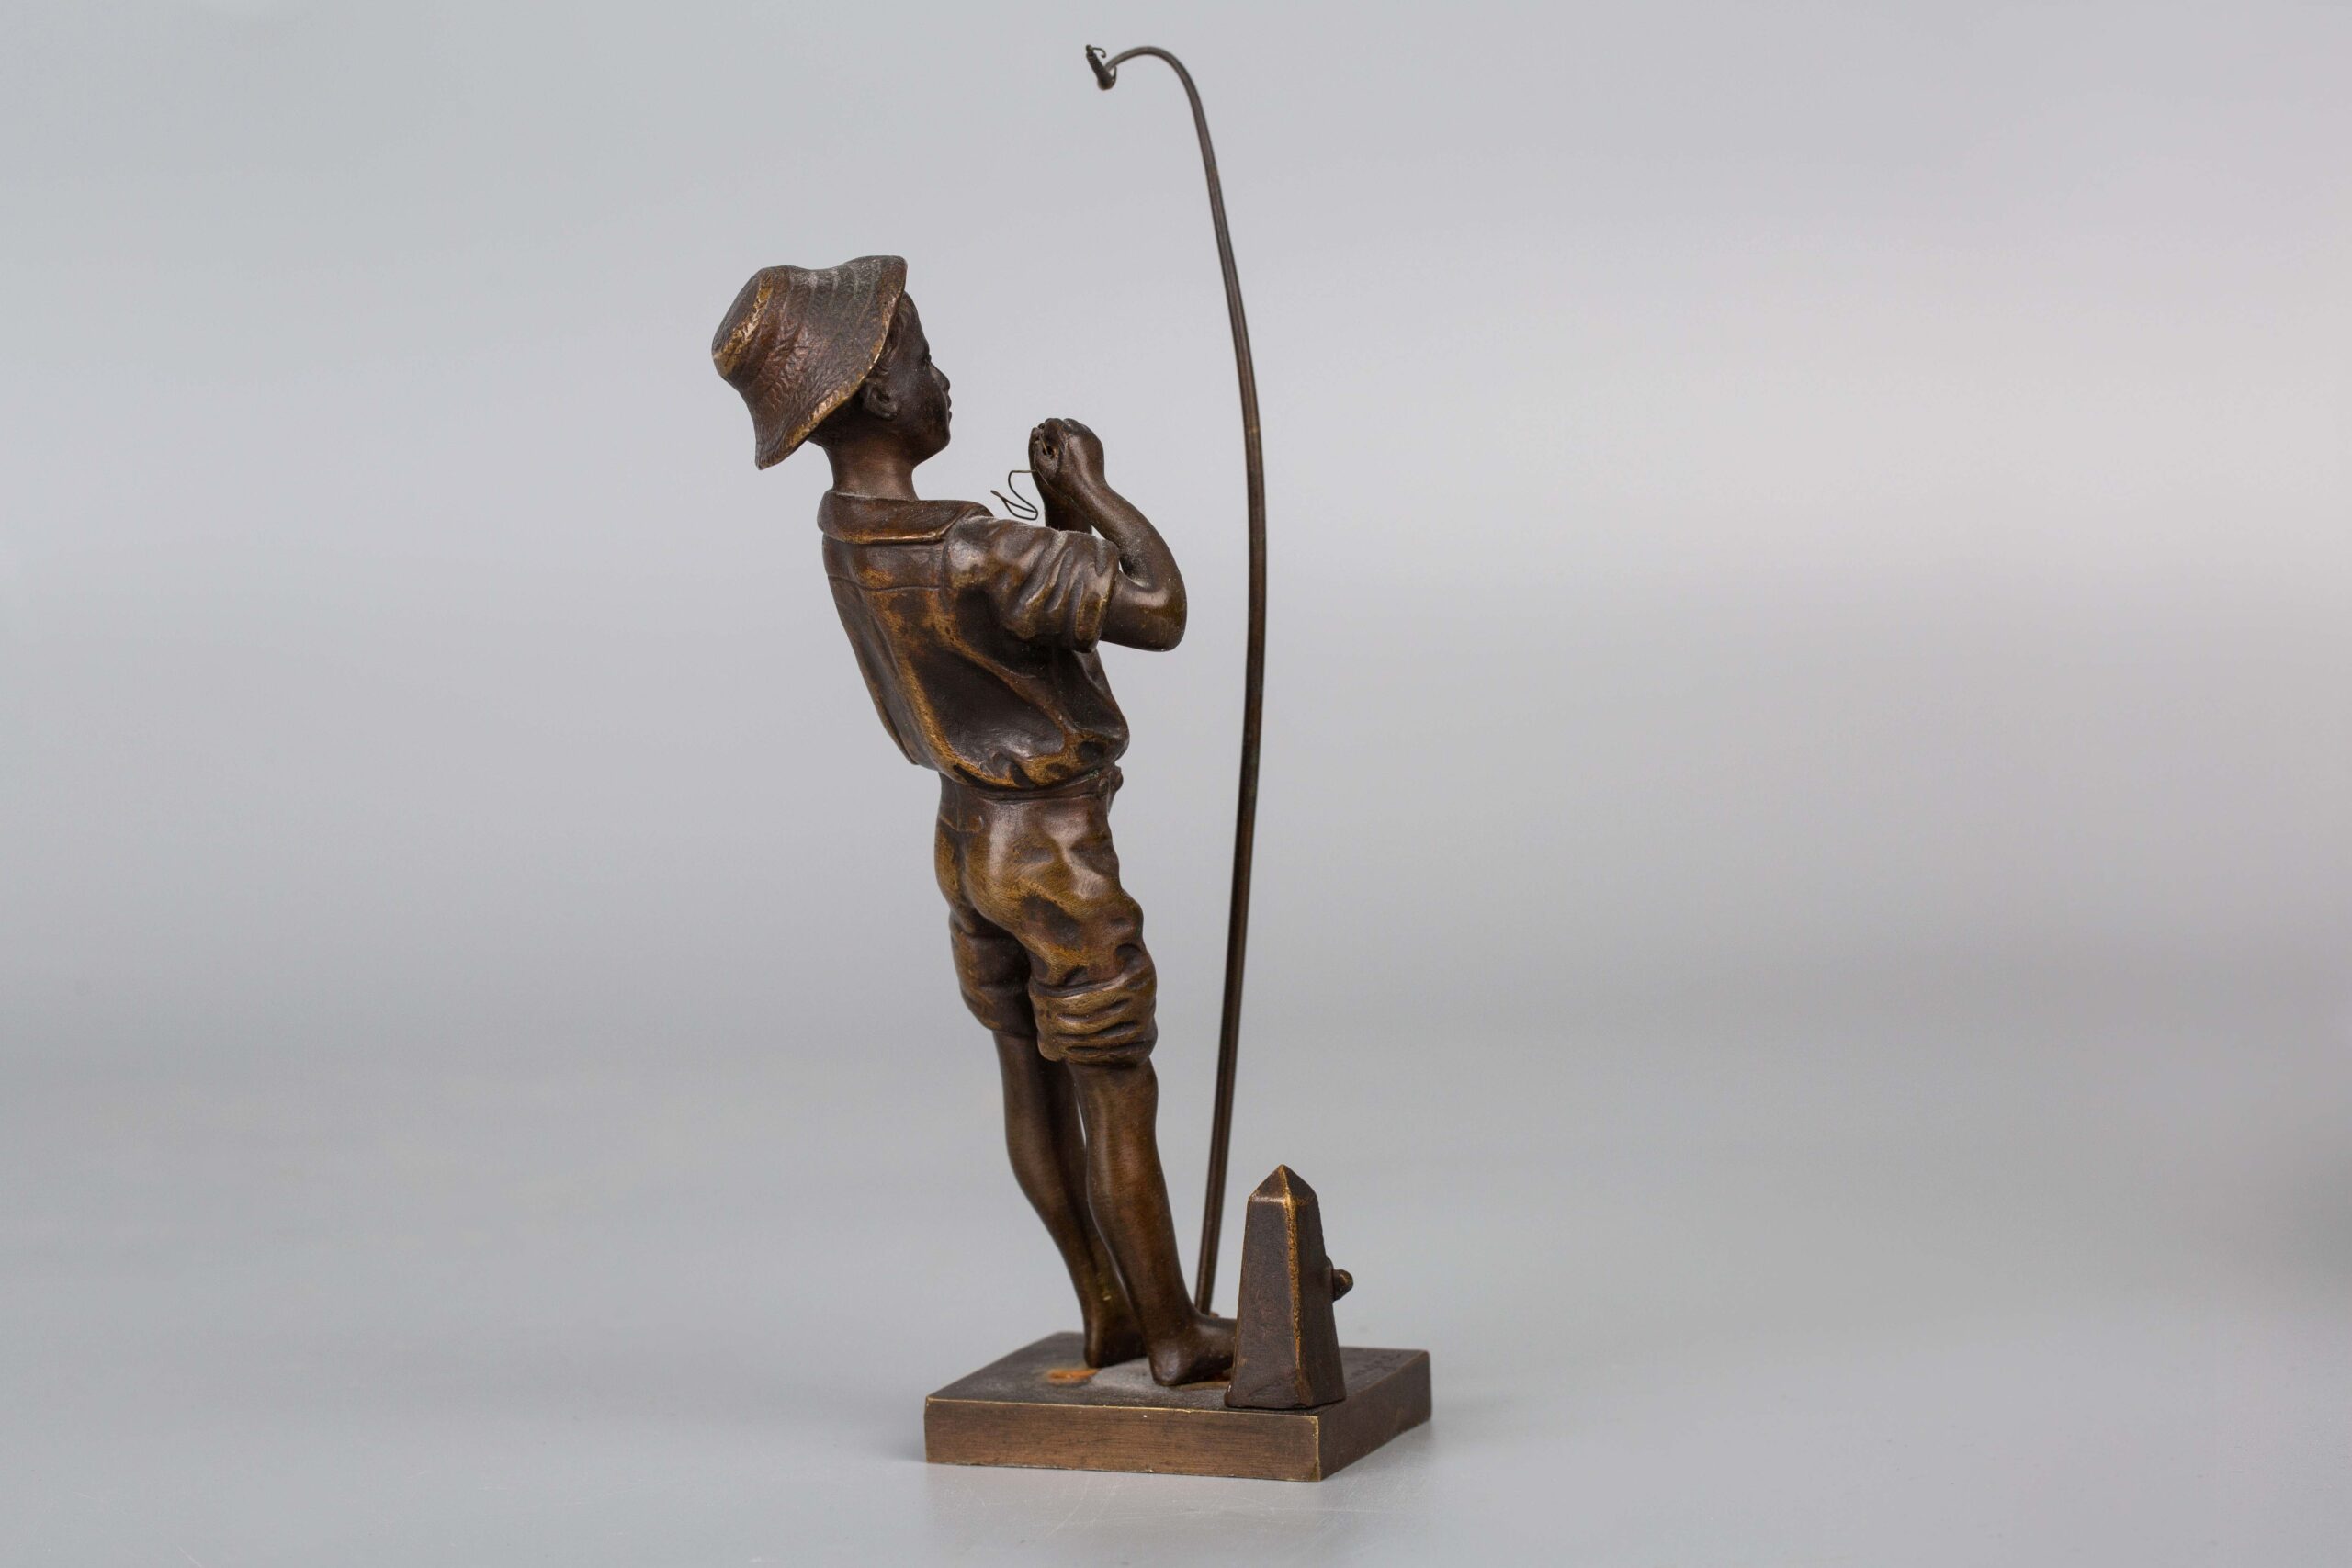 19th Century French Bronze Figure of a Fishing Boy After Pecheur by Adolphe  Jean Lavergne for sale at Pamono